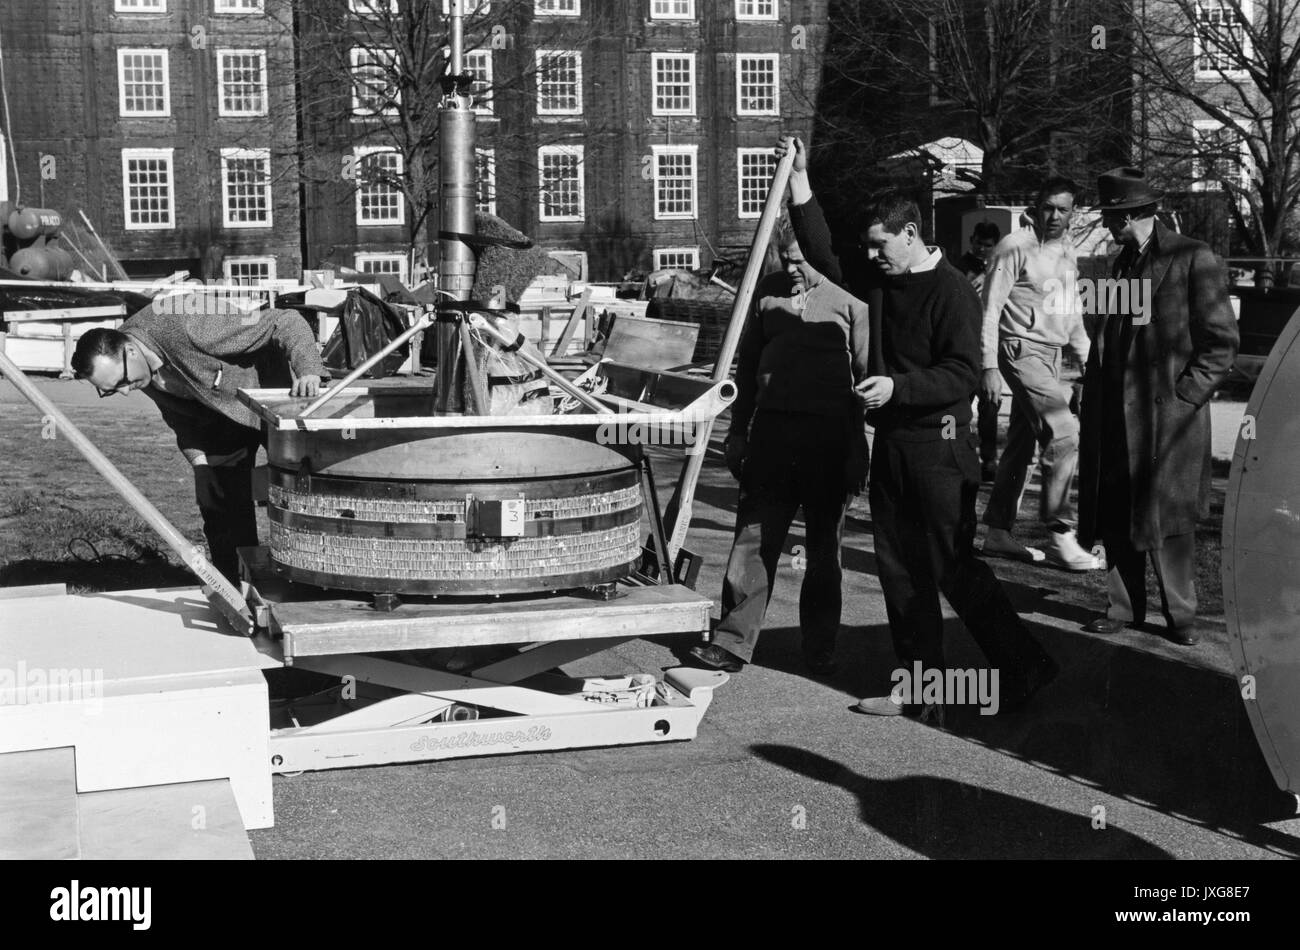 Astrophysics, Classes, Student Life Students and faculty are loading a balloon telescope, 1963. Stock Photo